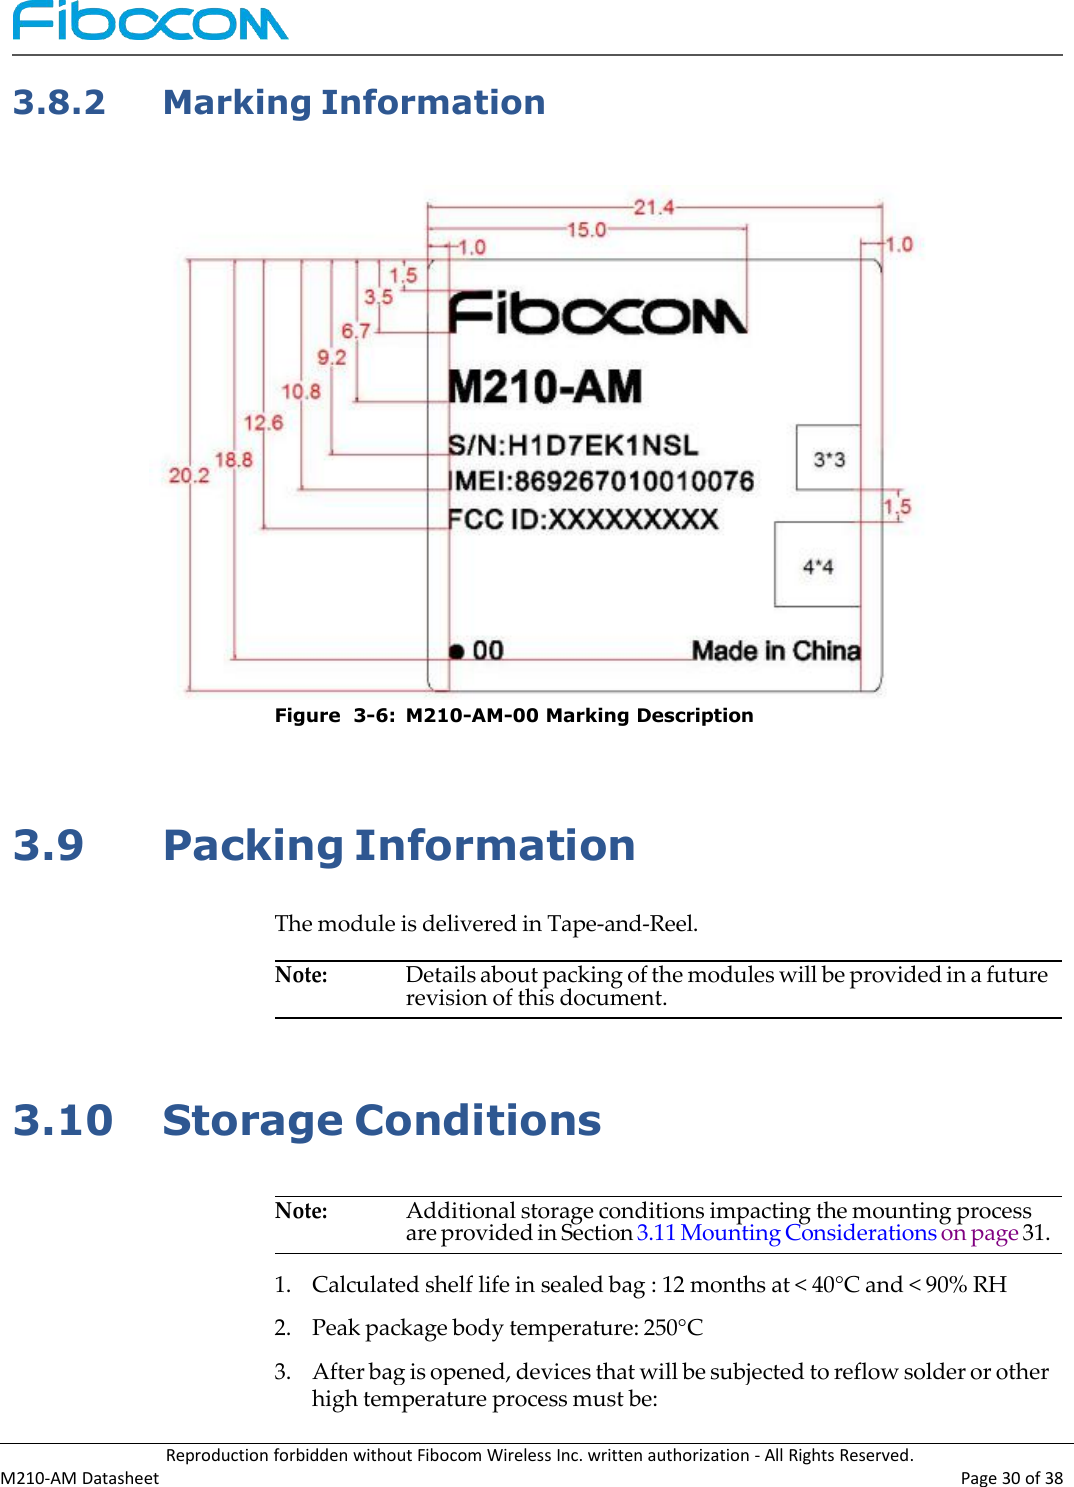 Reproduction forbidden without Fibocom Wireless Inc. written authorization - All Rights Reserved.M210-AM Datasheet Page 30 of 383.8.2Marking InformationFigure 3-6: M210-AM-00 Marking Description3.9Packing InformationThe module is delivered in Tape-and-Reel.Note:Details about packing of the modules will be provided in a futurerevision of this document.3.10Storage ConditionsNote:Additional storage conditions impacting the mounting processare provided in Section 3.11 Mounting Considerations on page 31.1.Calculated shelf life in sealed bag : 12 months at &lt; 40°C and &lt; 90% RH2.Peak package body temperature: 250°C3.After bag is opened, devices that will be subjected to reflow solder or otherhigh temperature process must be: